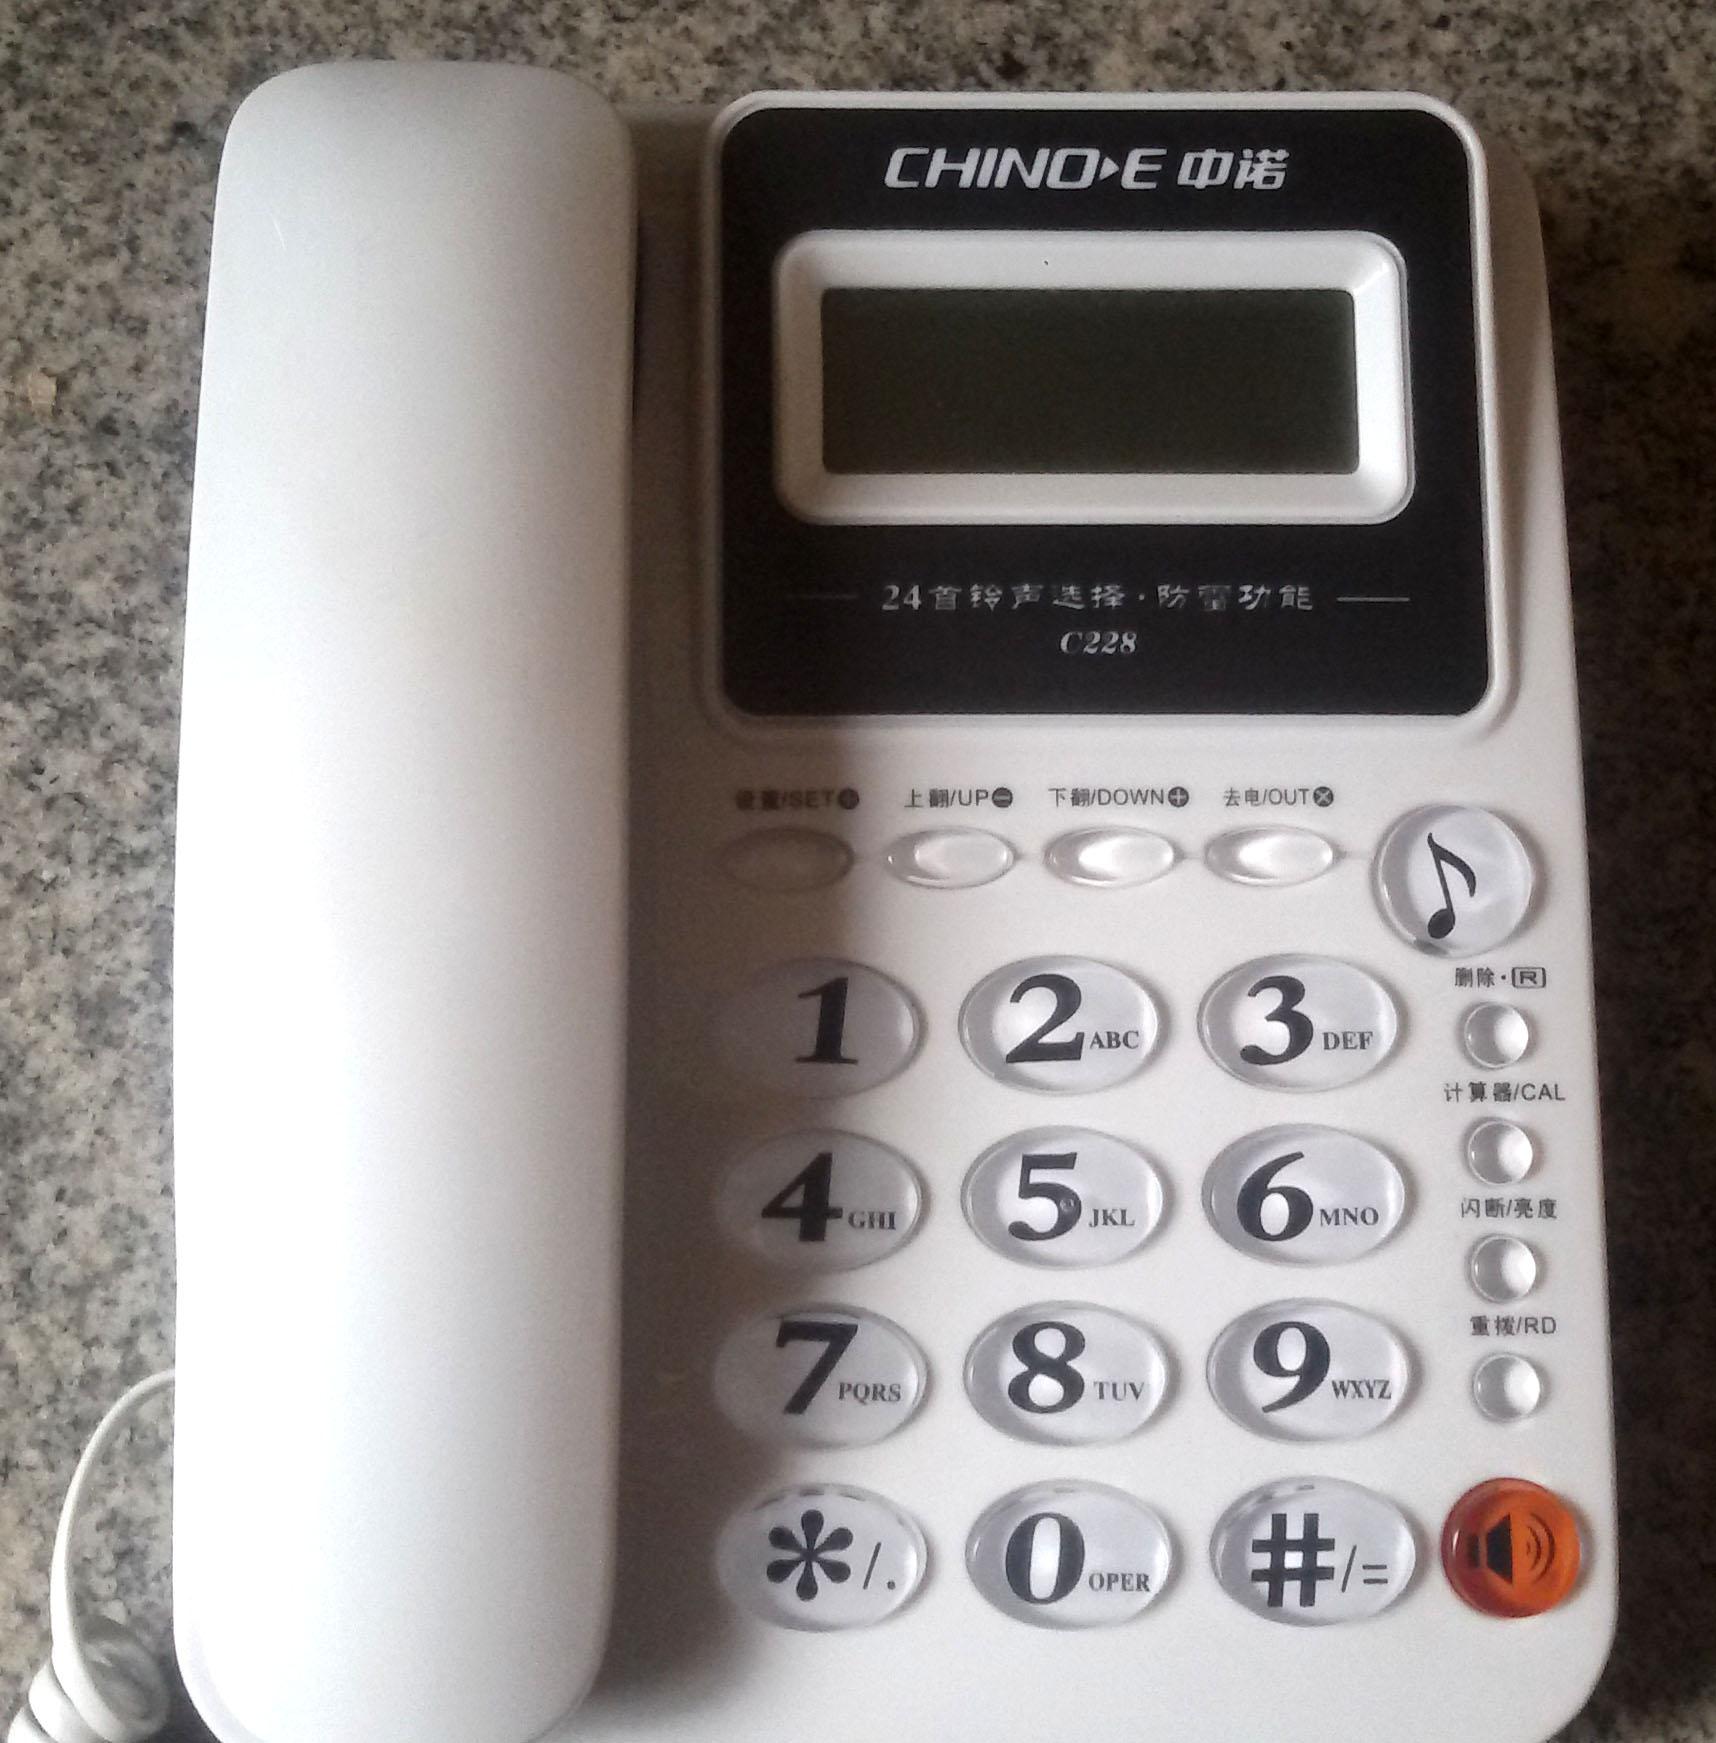 Phone calls from the home office of the desktop phone